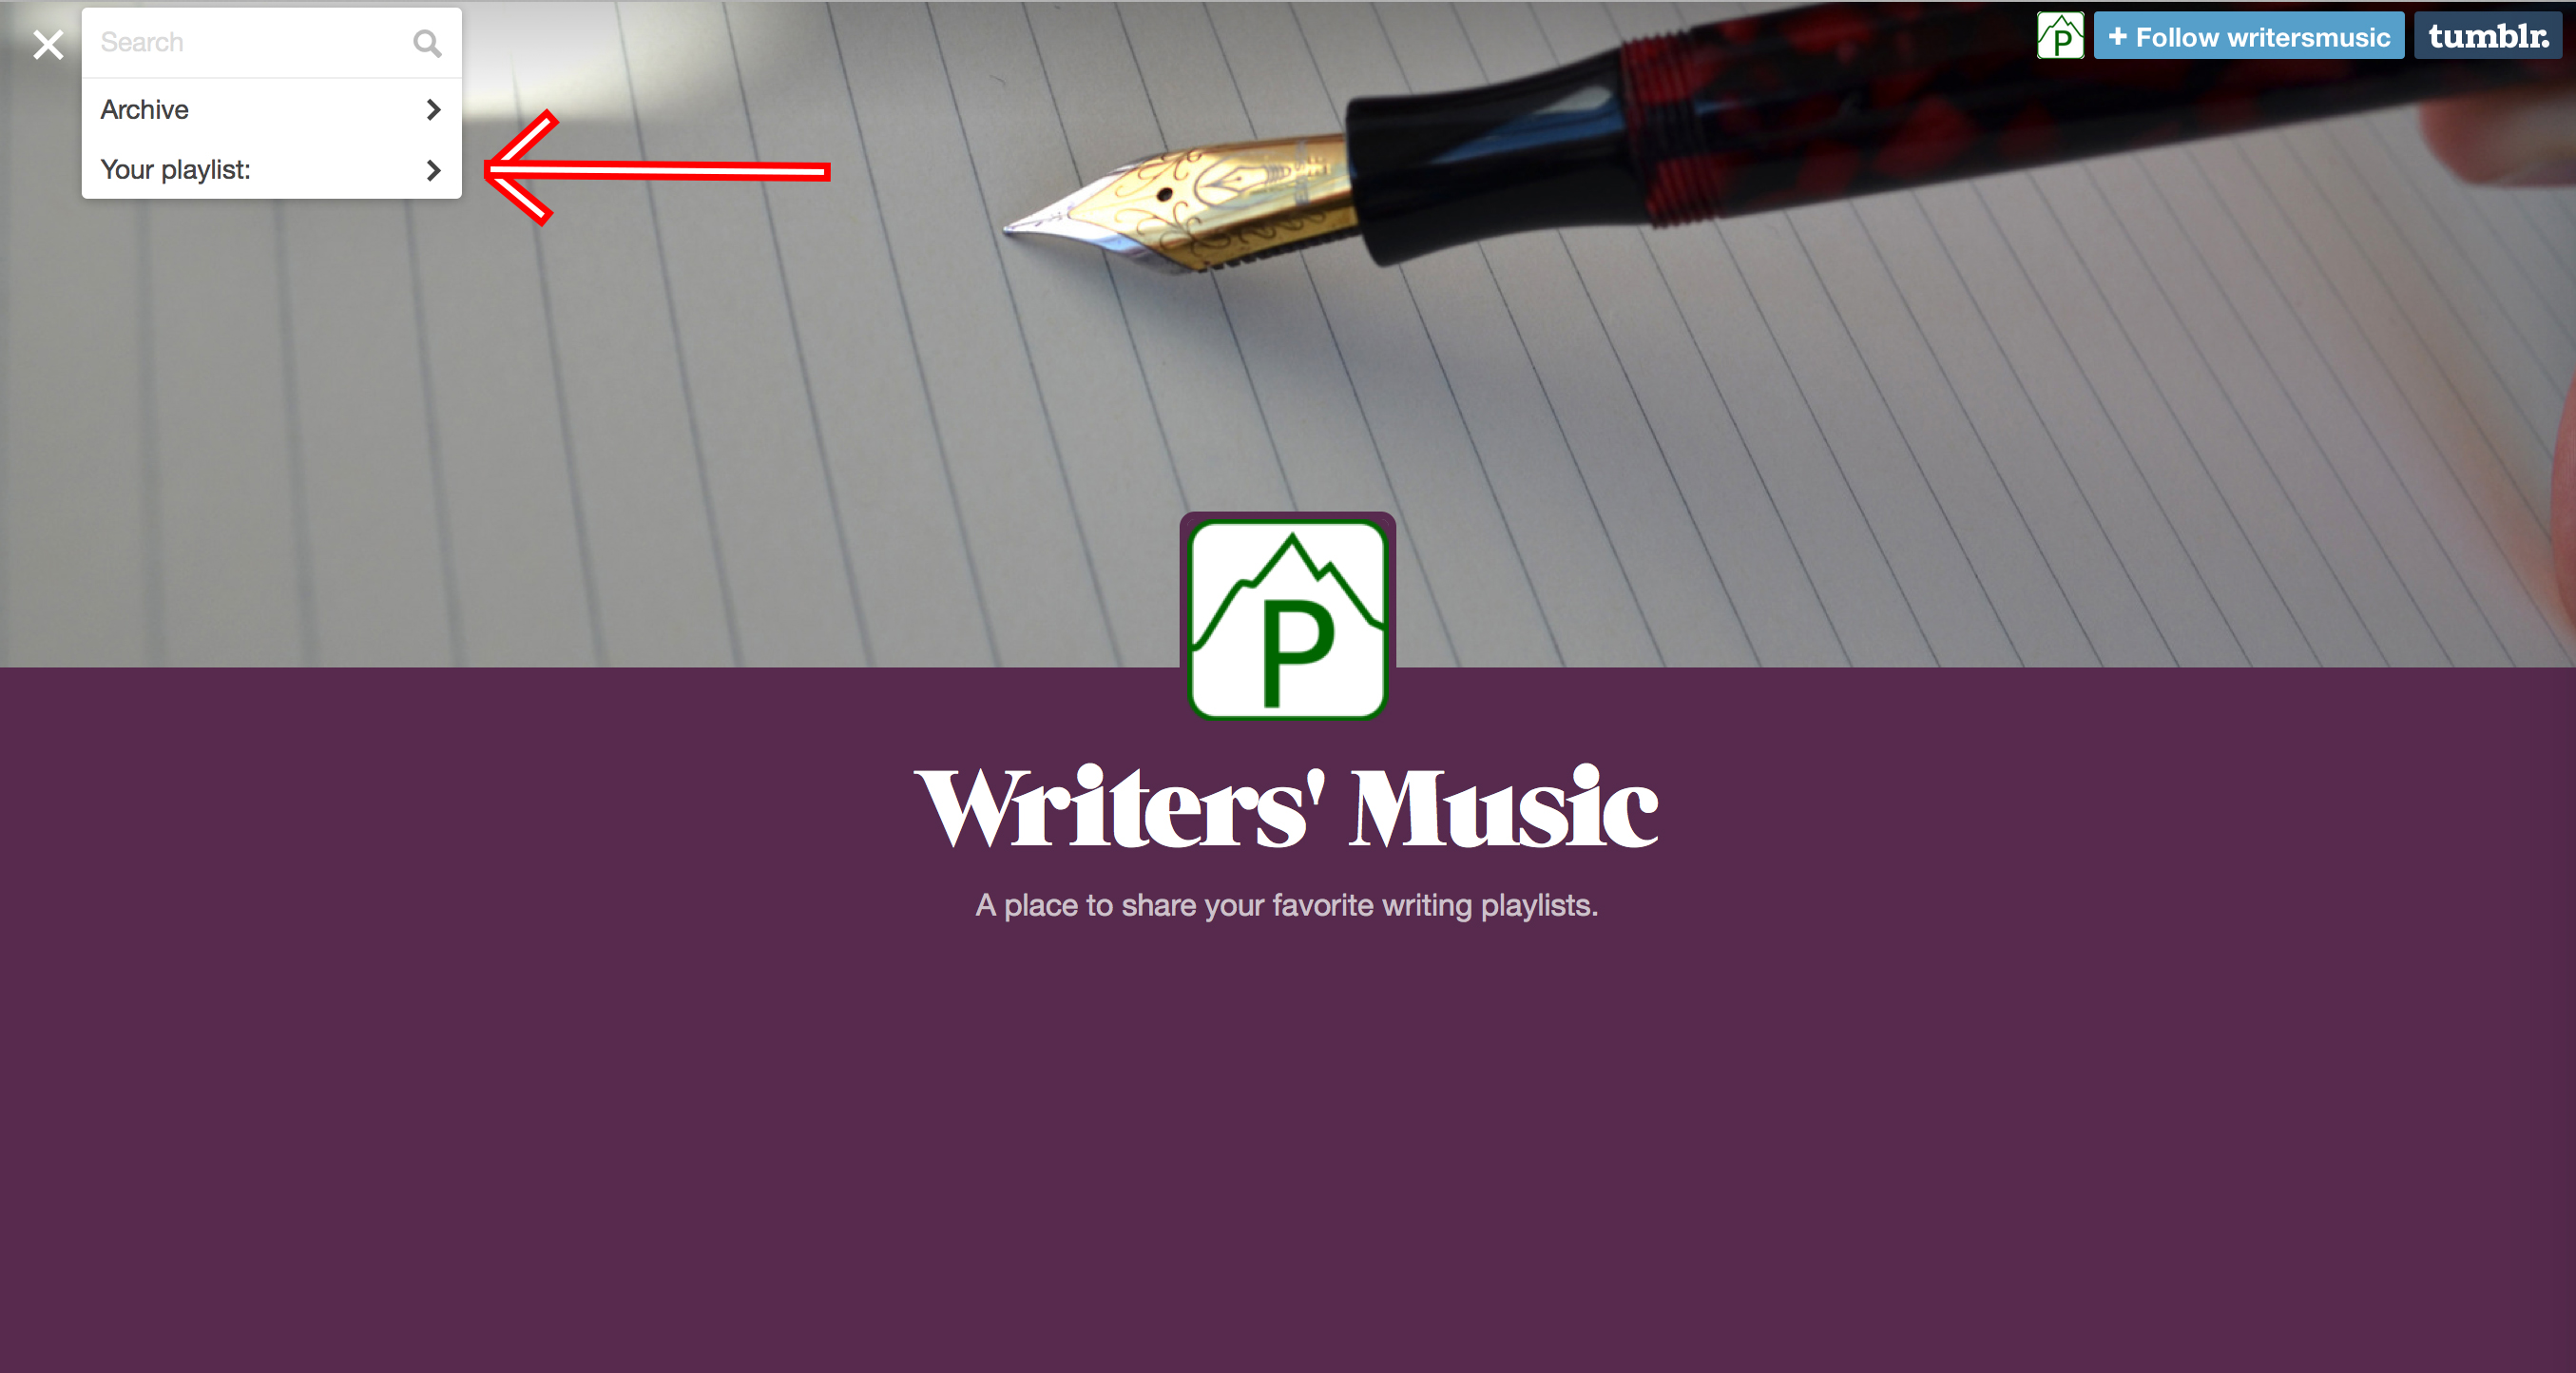 calling all writers